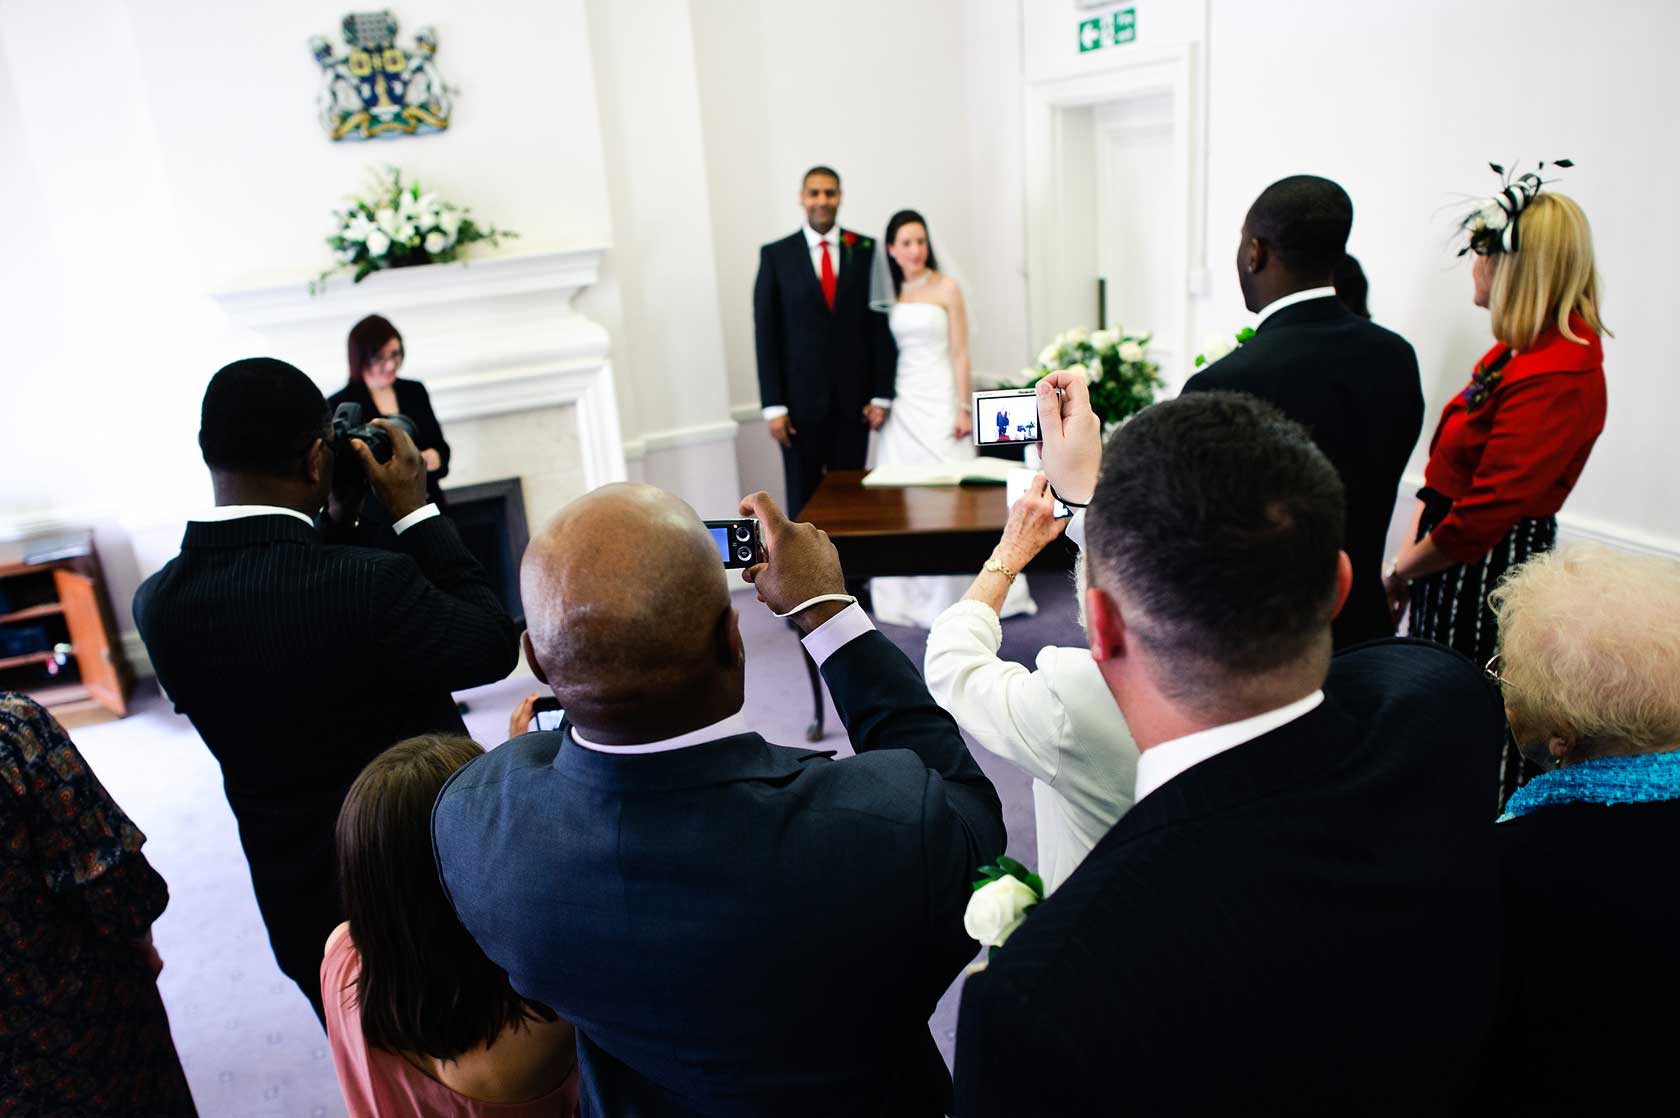 Reportage Wedding Photography at Old Marylebone Town Hall